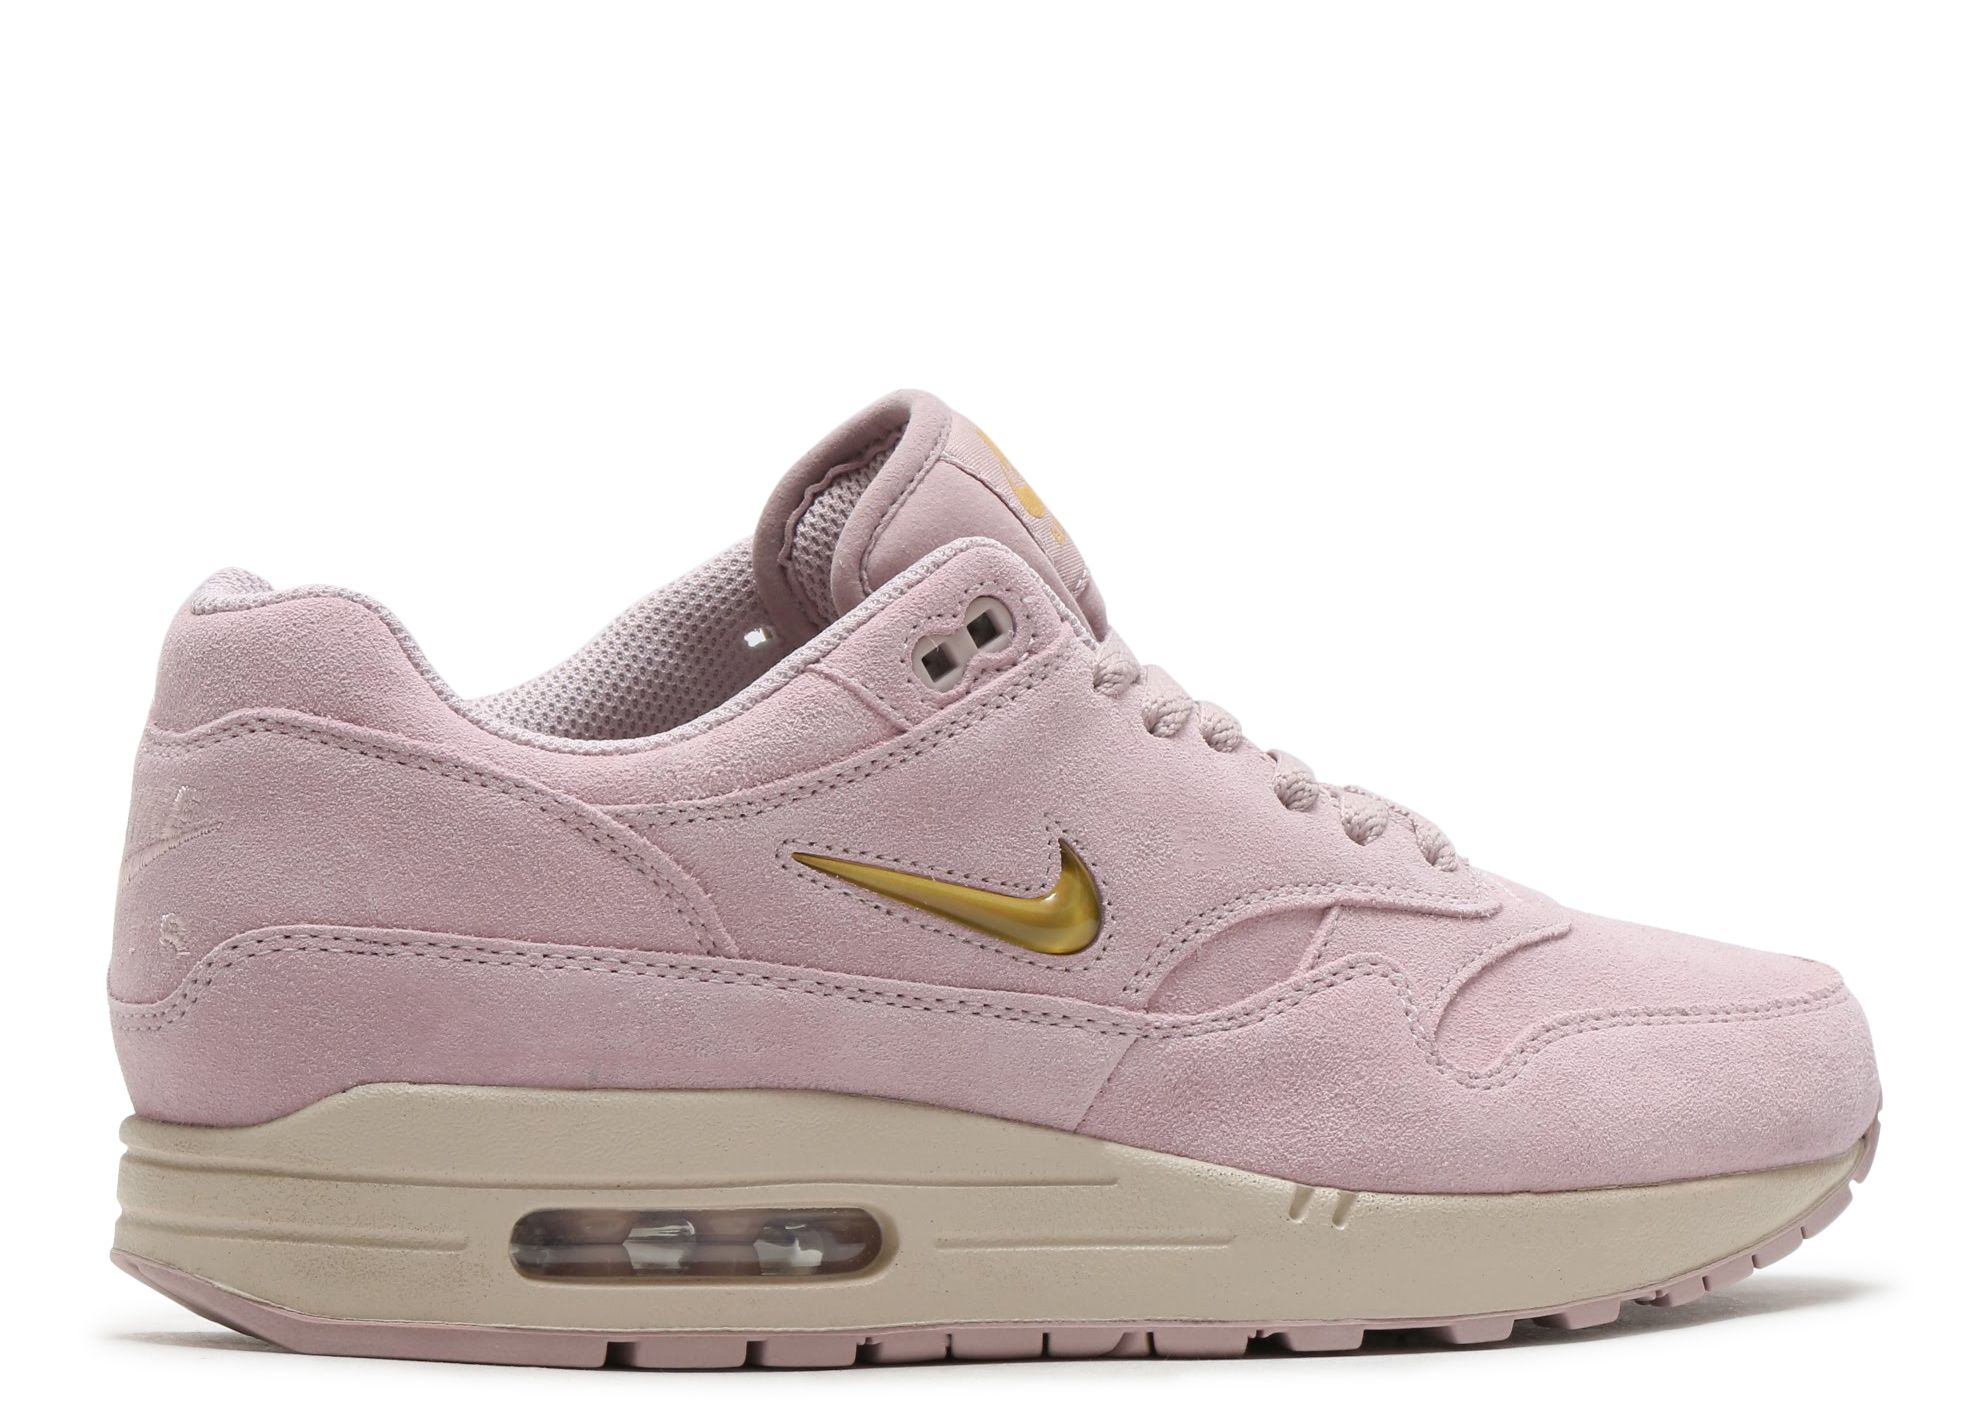 actress Say aside Sculptor Air Max 1 Particle Rose Store, SAVE 55% - aveclumiere.com